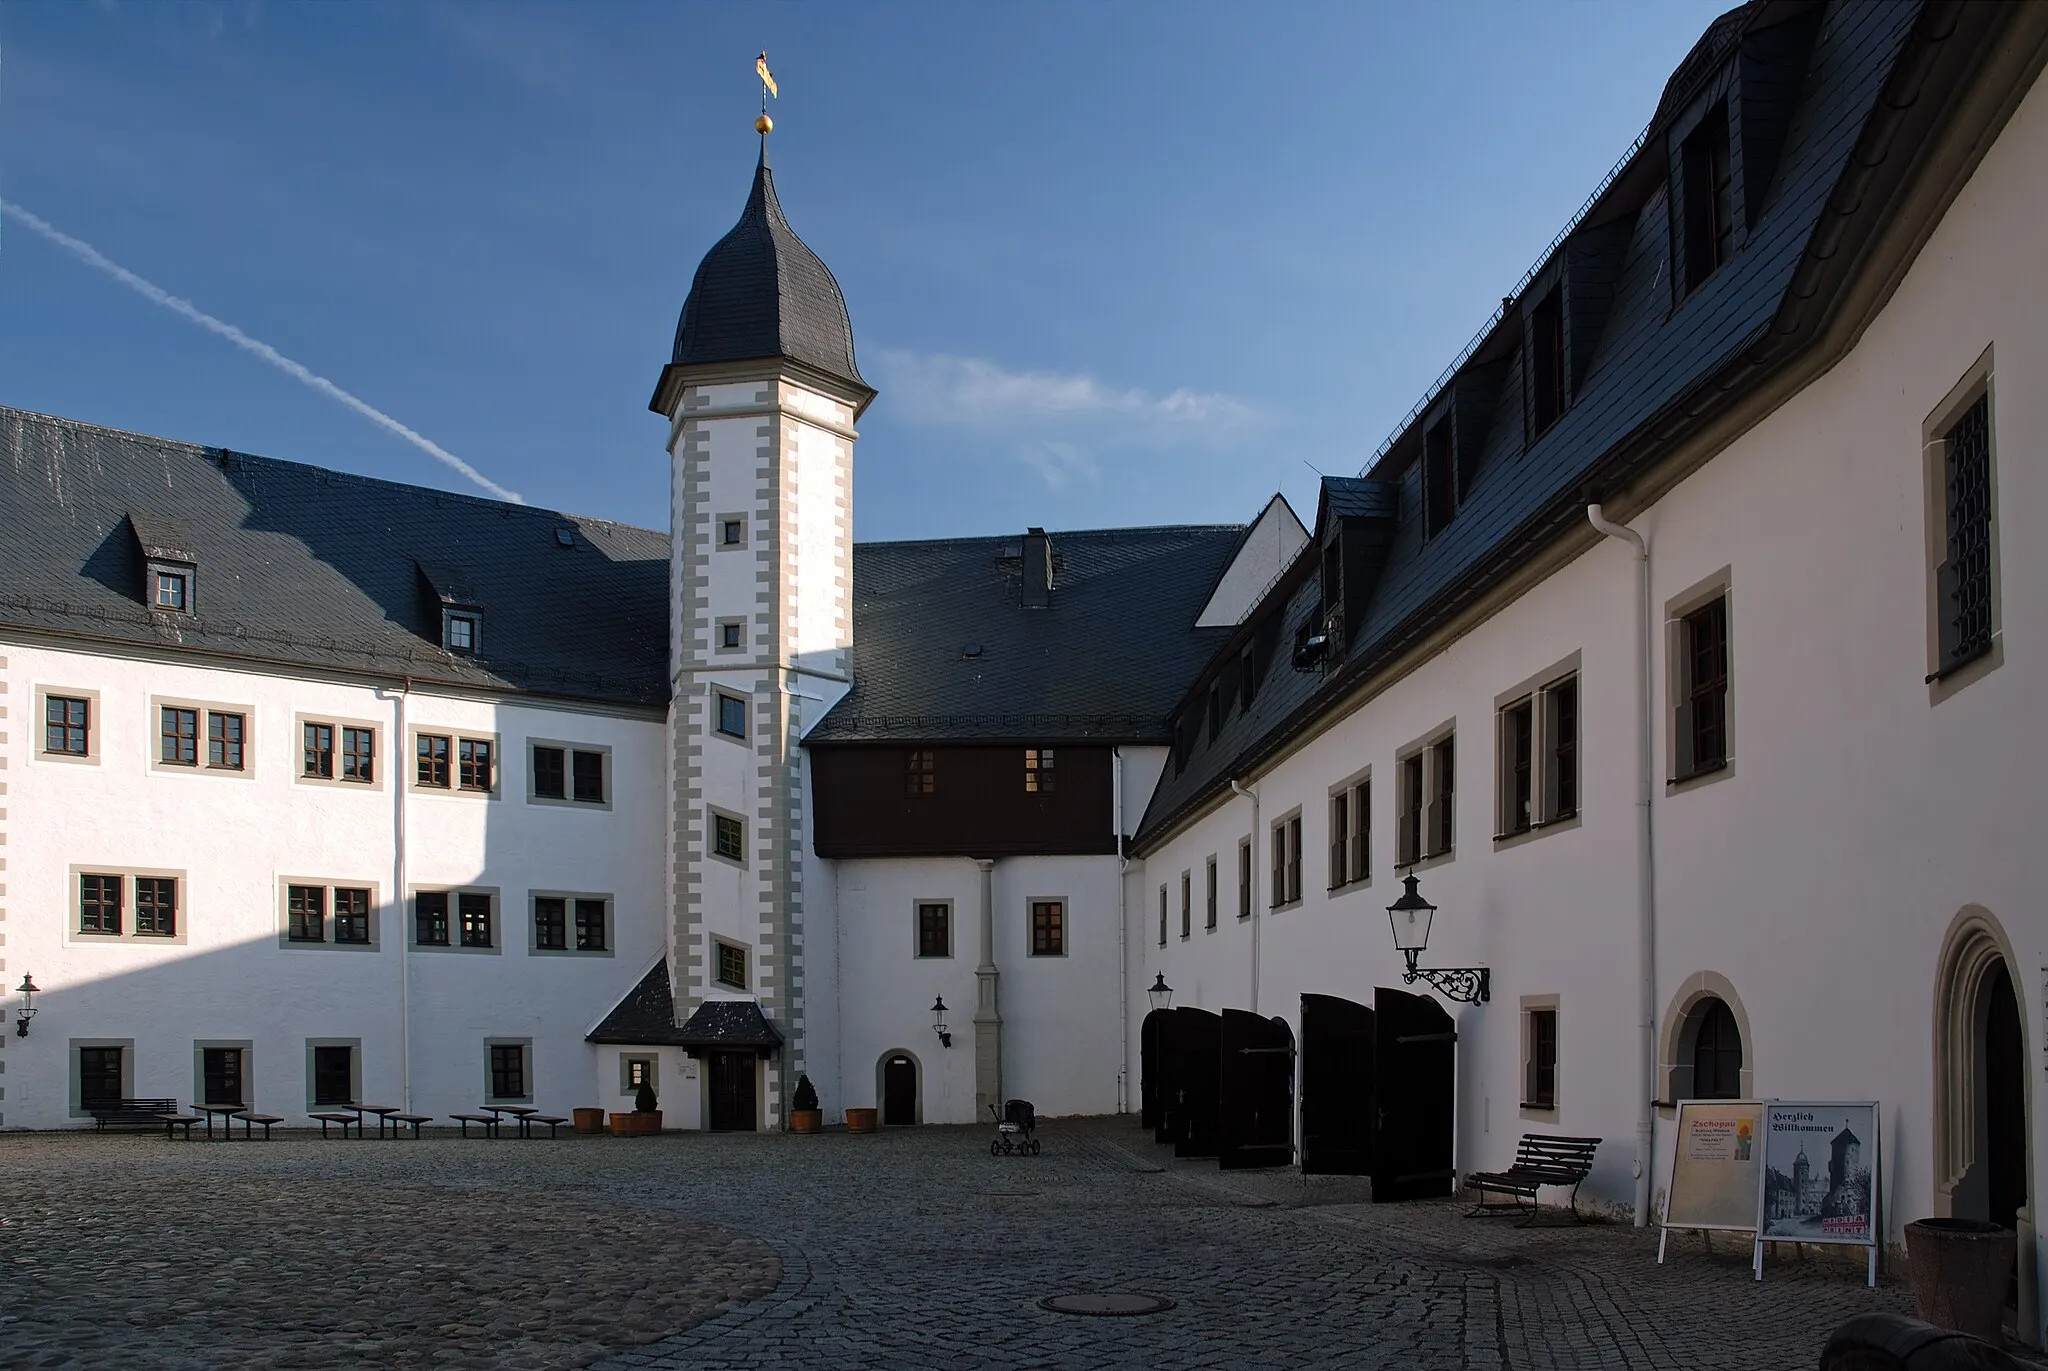 Photo showing: This image shows the courtyard of the castle Wildeck in Zschopau, Germany.